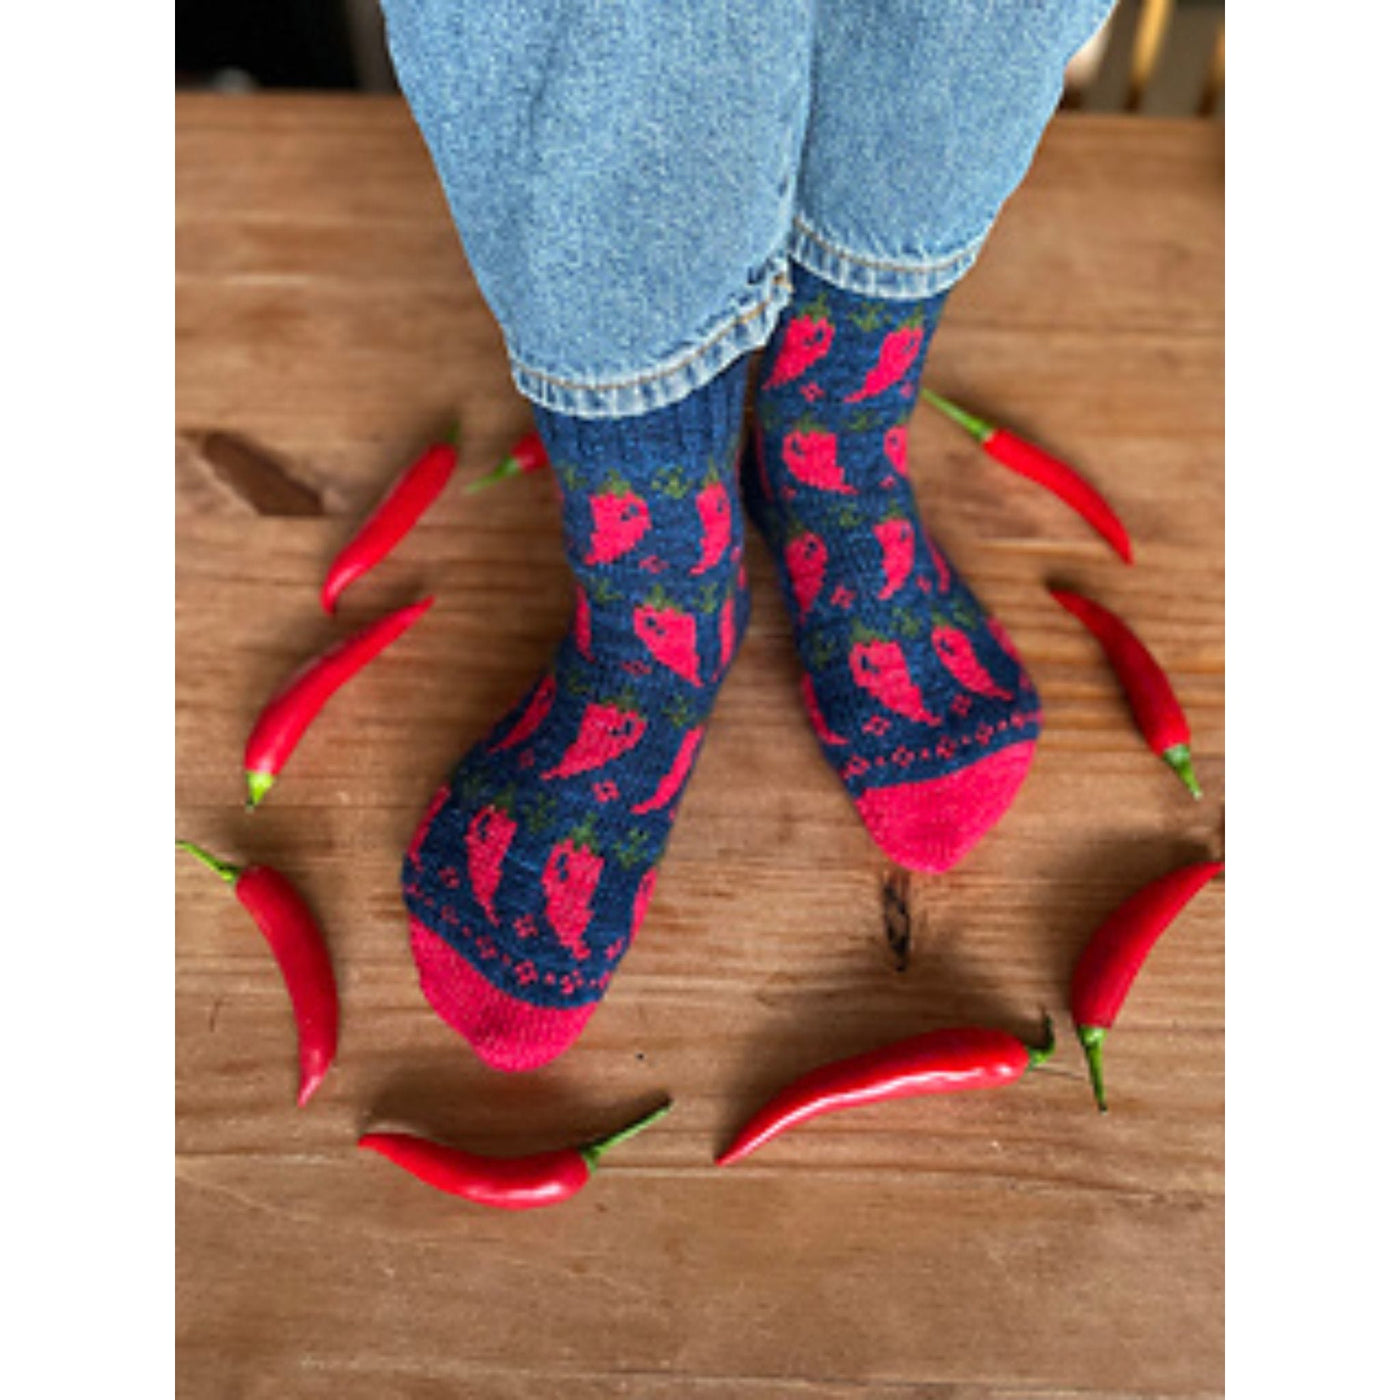 Two feet standing on a table surrounded by chile peppers wearing blue socks with a red and green chile pepper motif